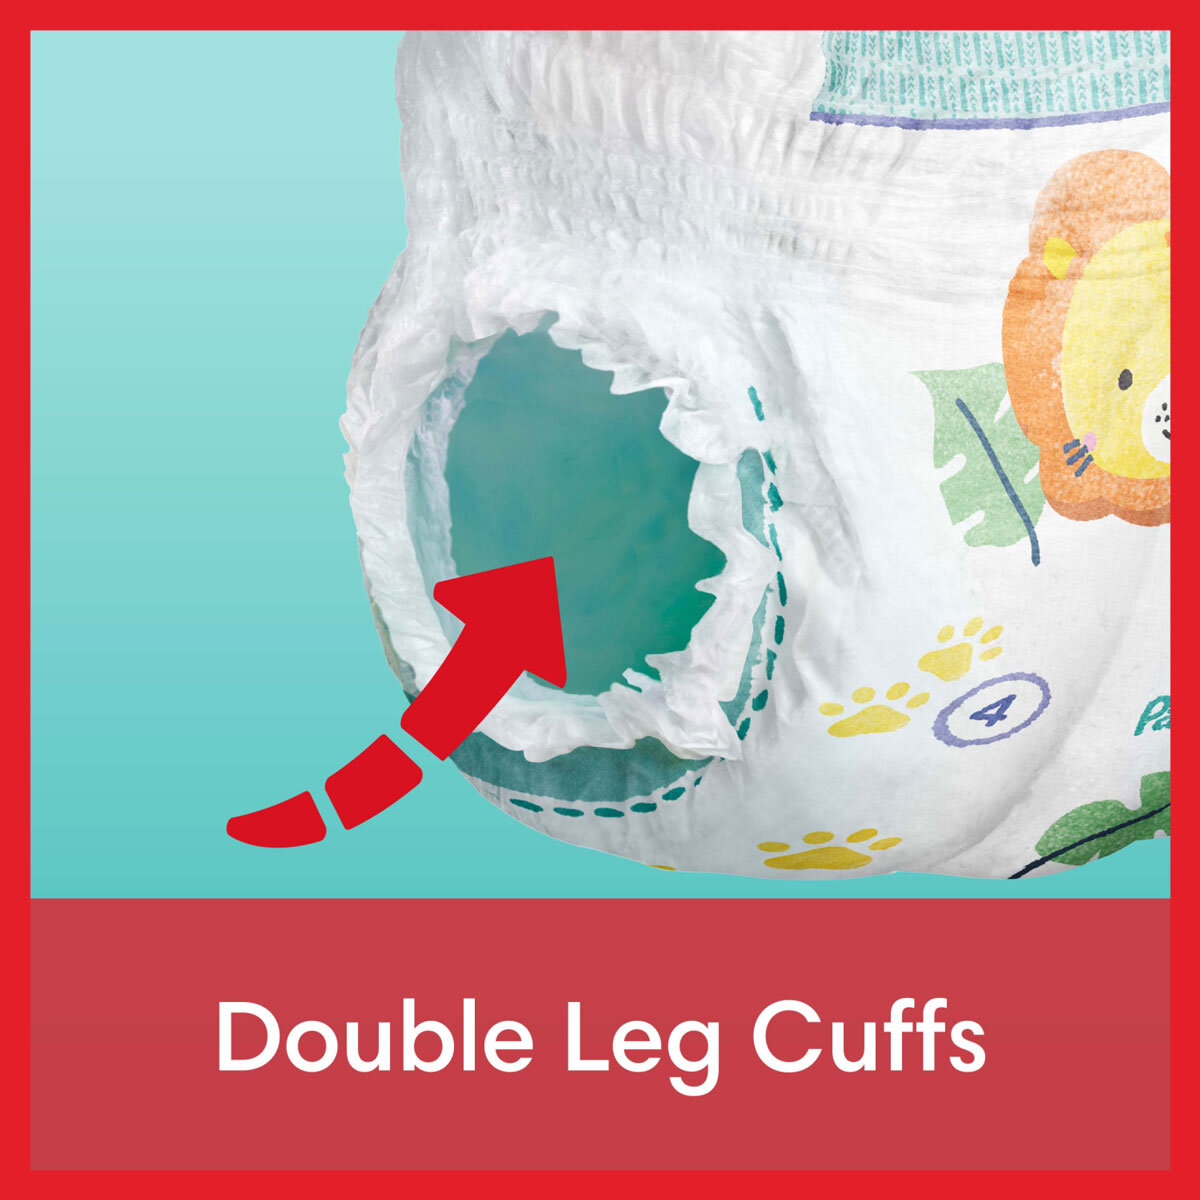 image to show double leg cuffs